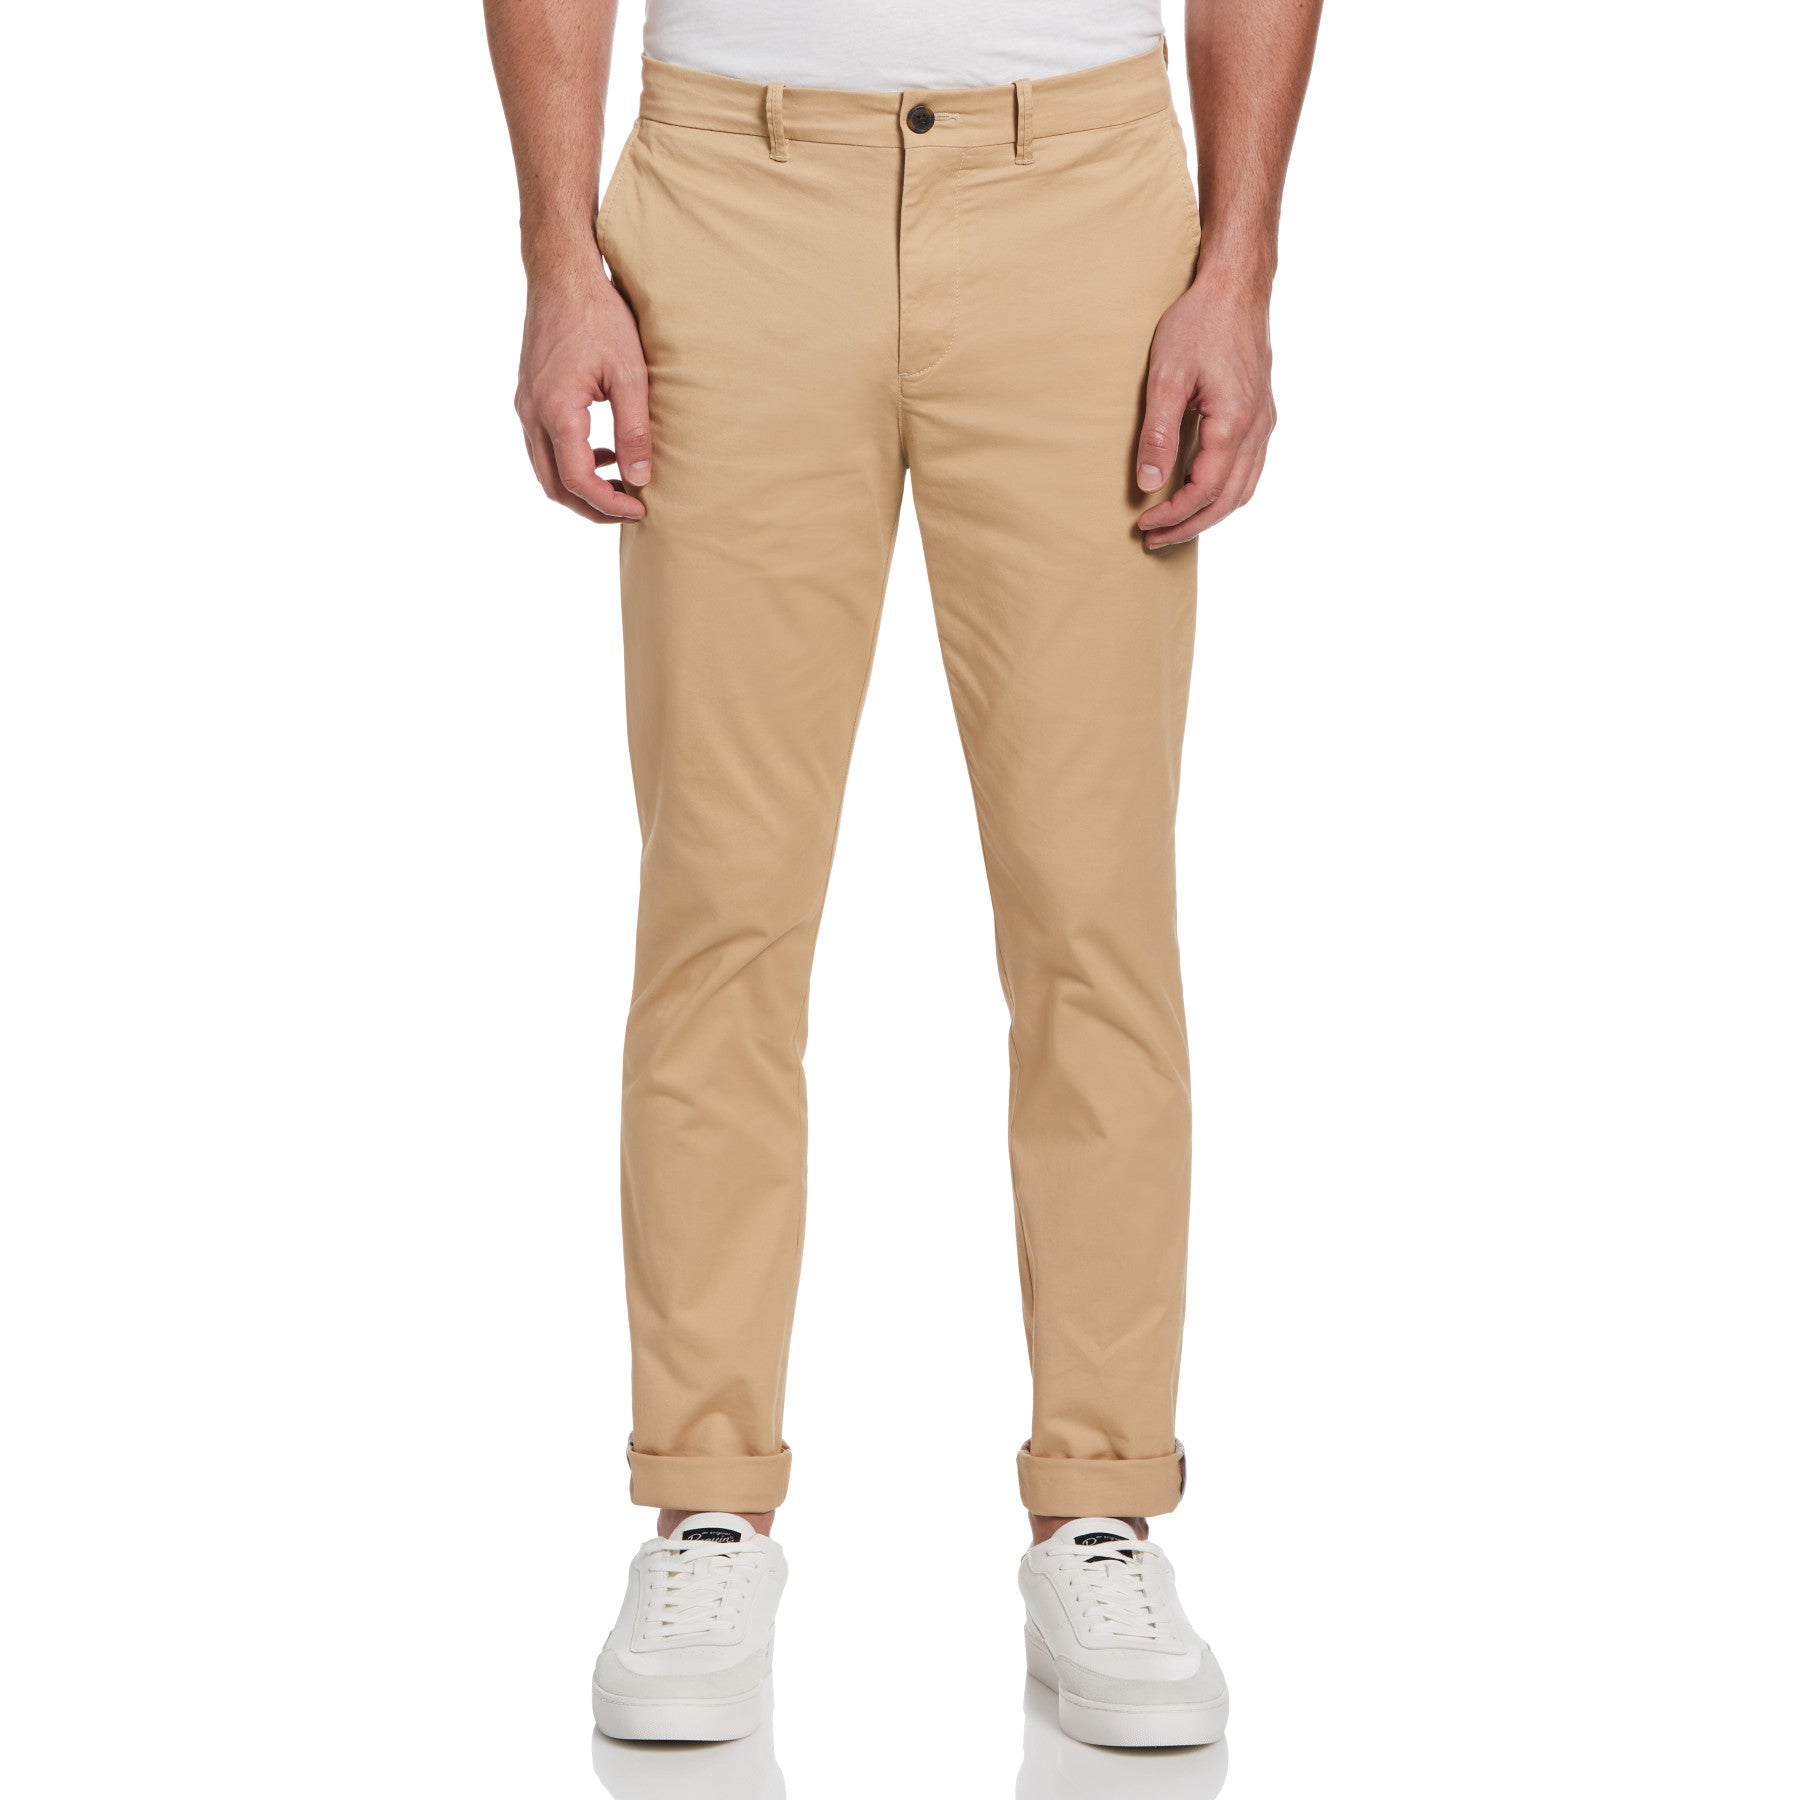 View Recycled Cotton Stretch Twill Chino Pant In Travertine information